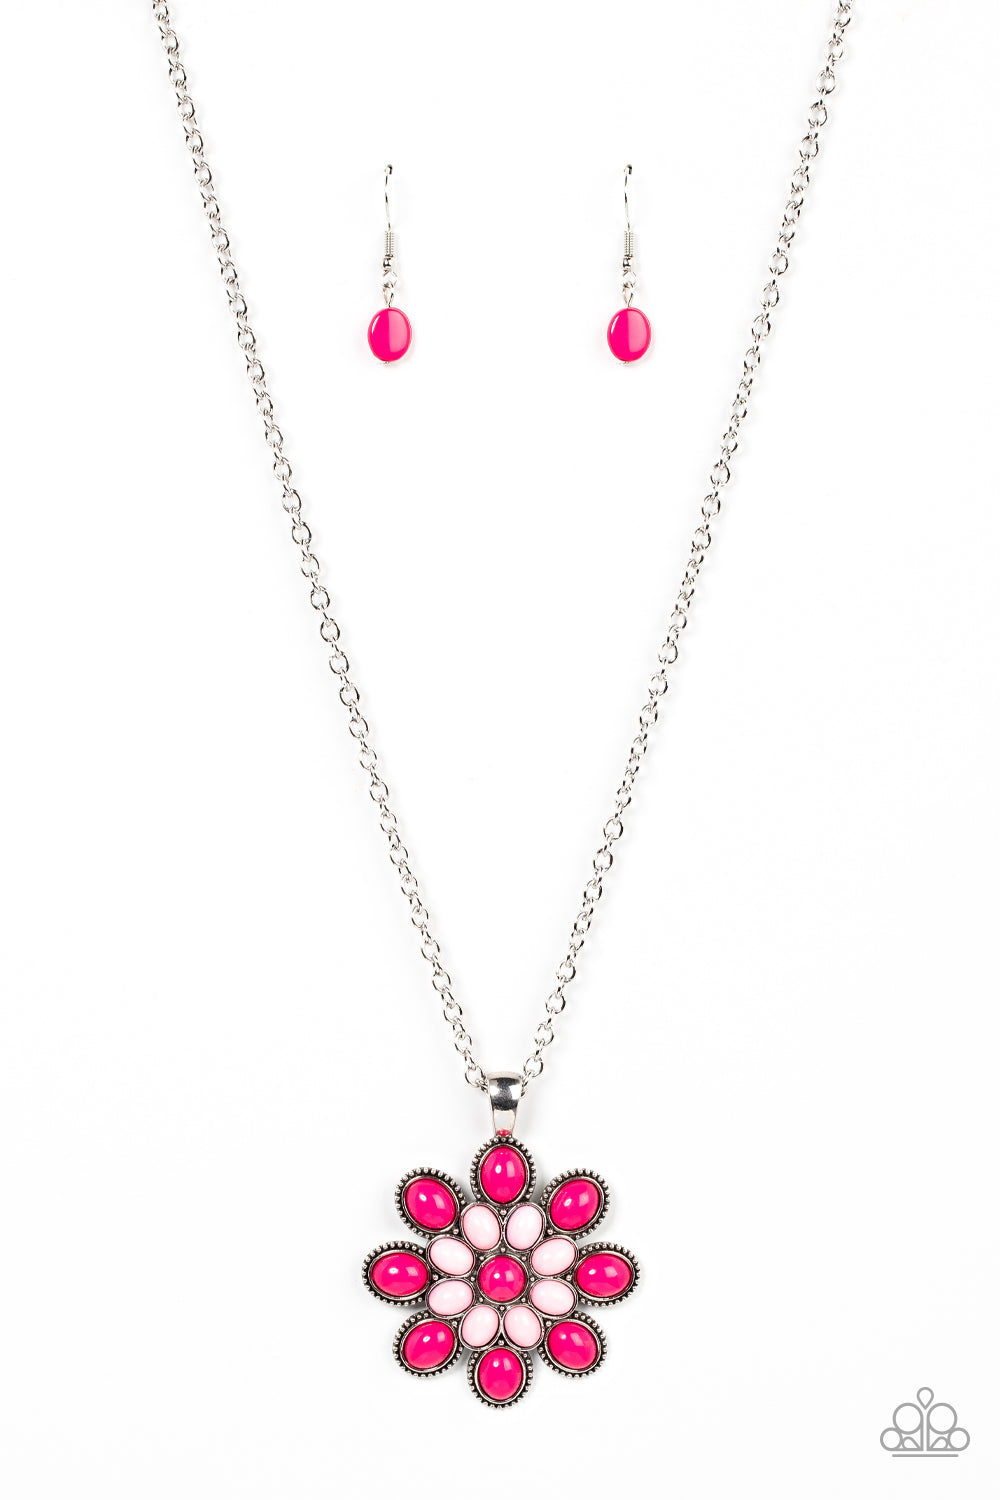 Paparazzi Necklaces - In the Meadow of Nowhere - Pink